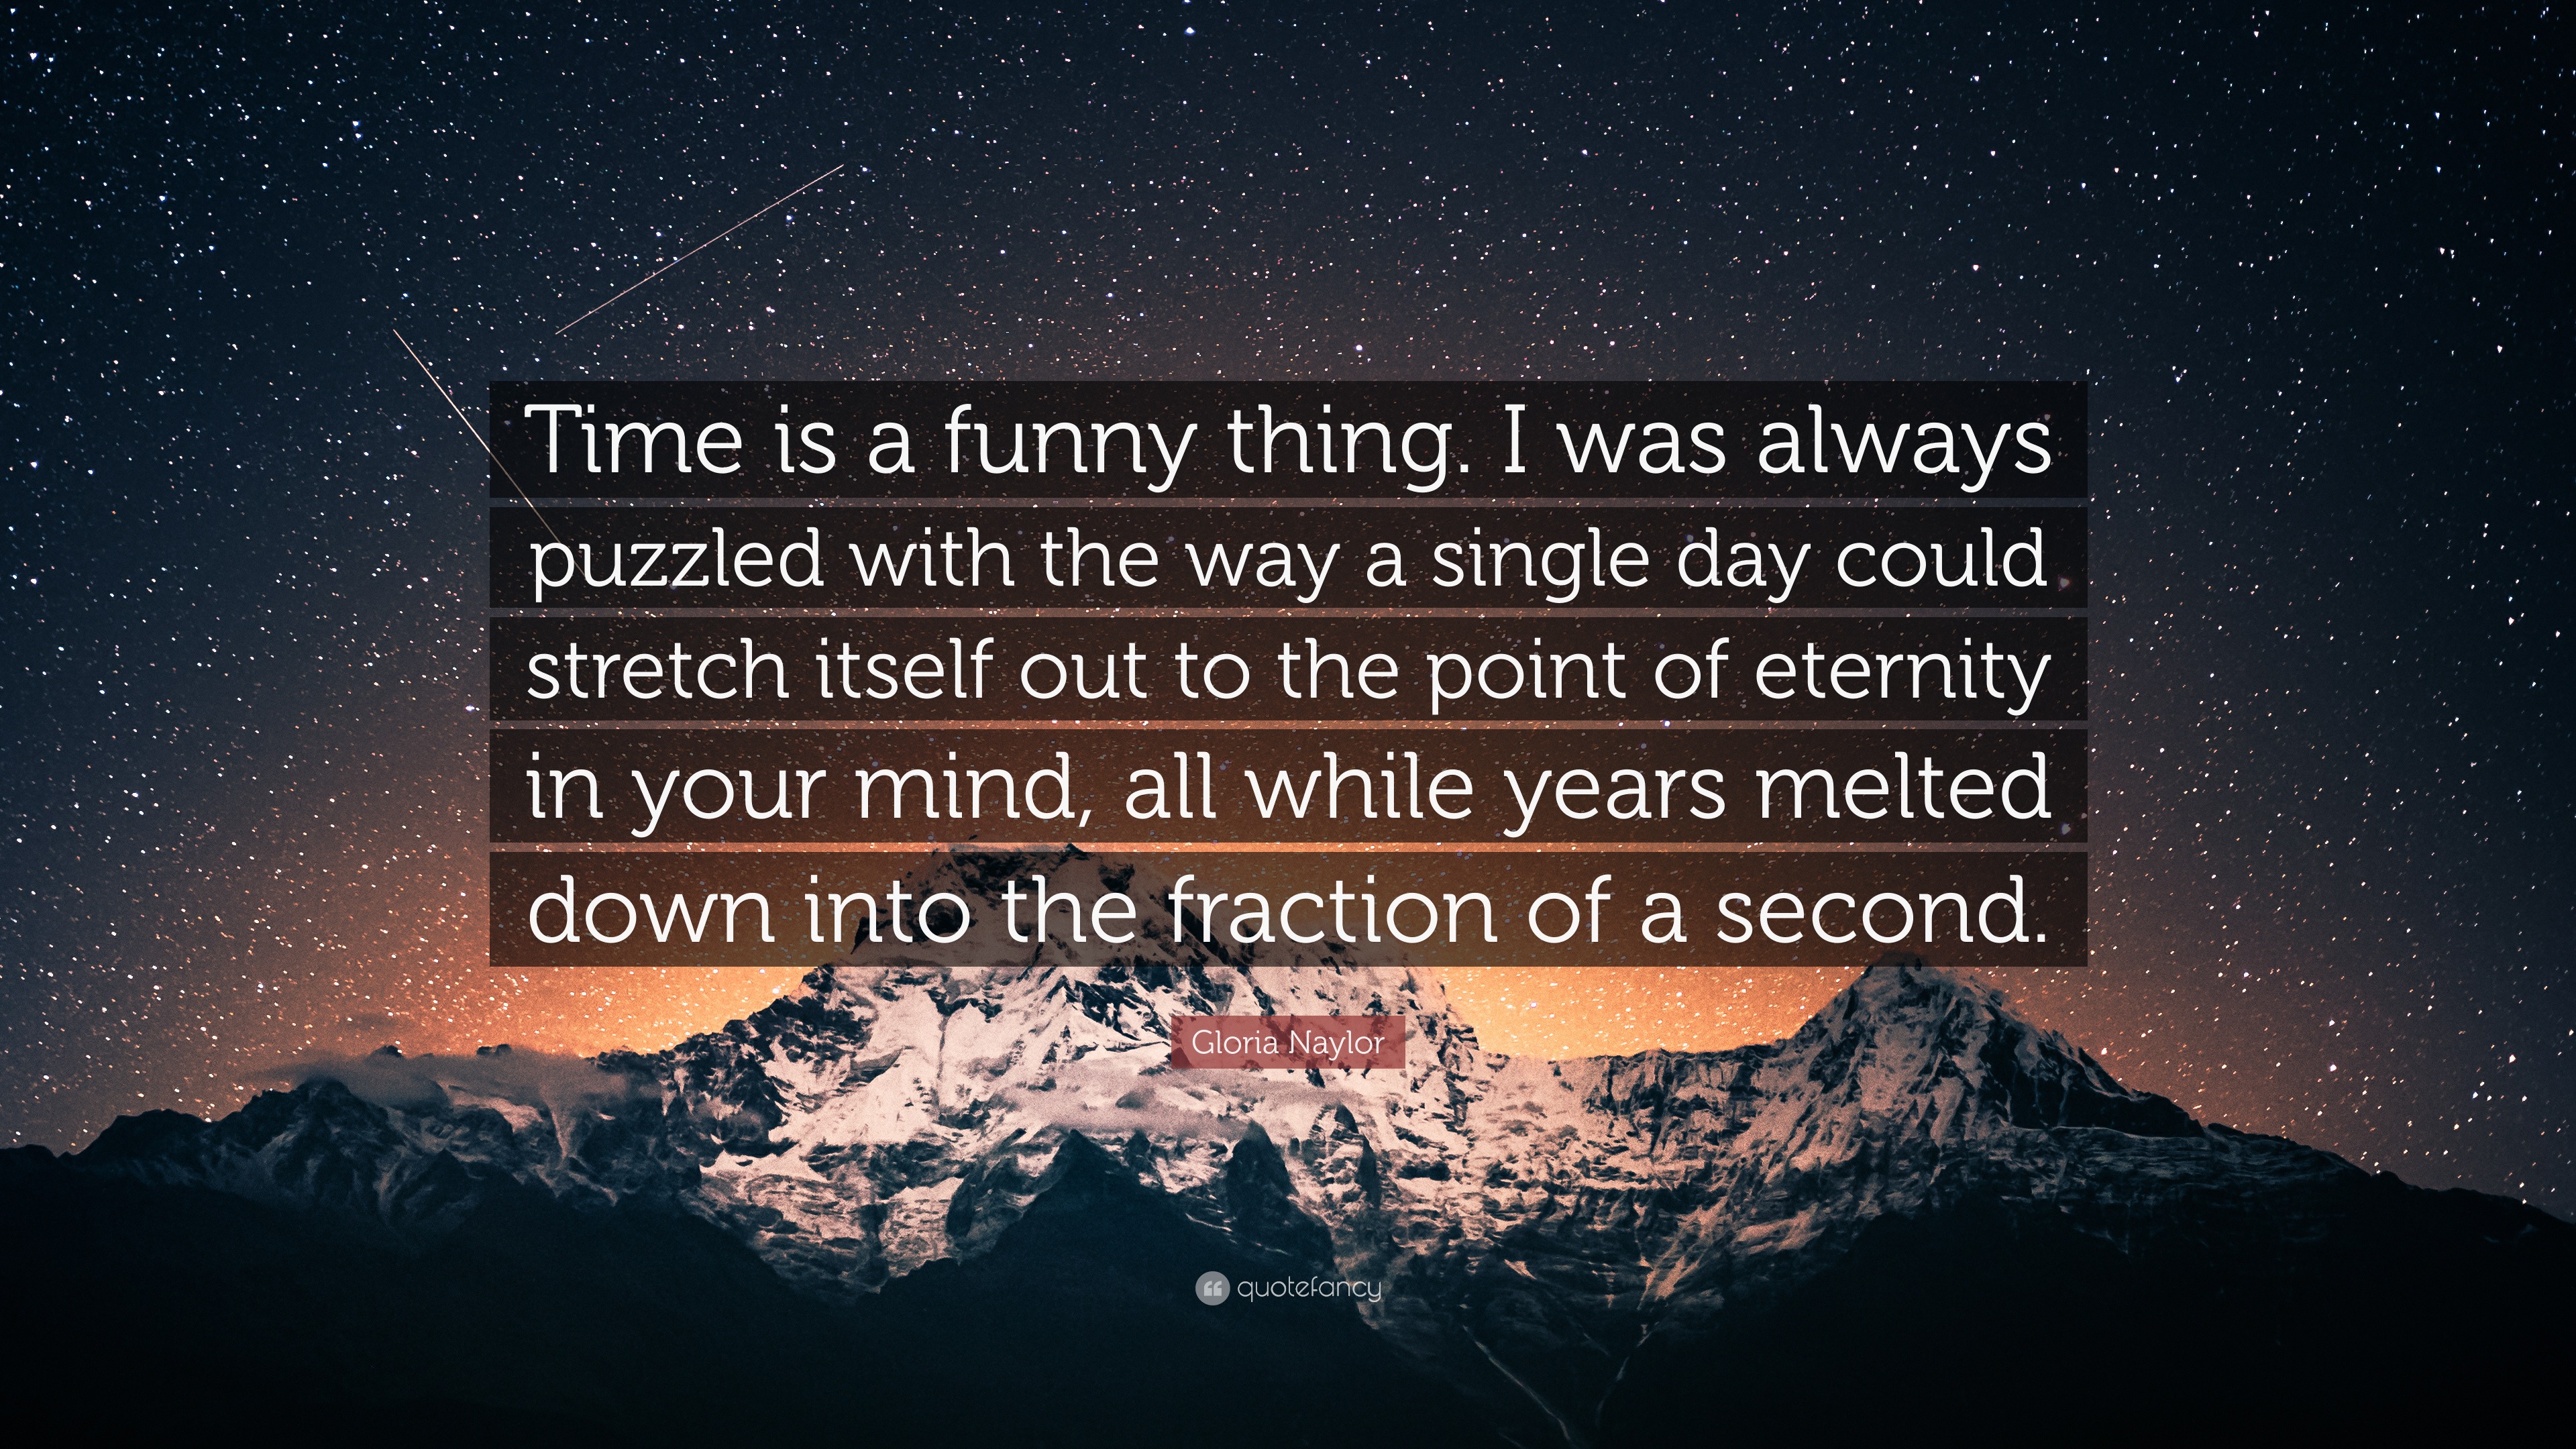 Gloria Naylor Quote: “Time is a funny thing. I was always puzzled with the  way a single day could stretch itself out to the point of eternity ...”